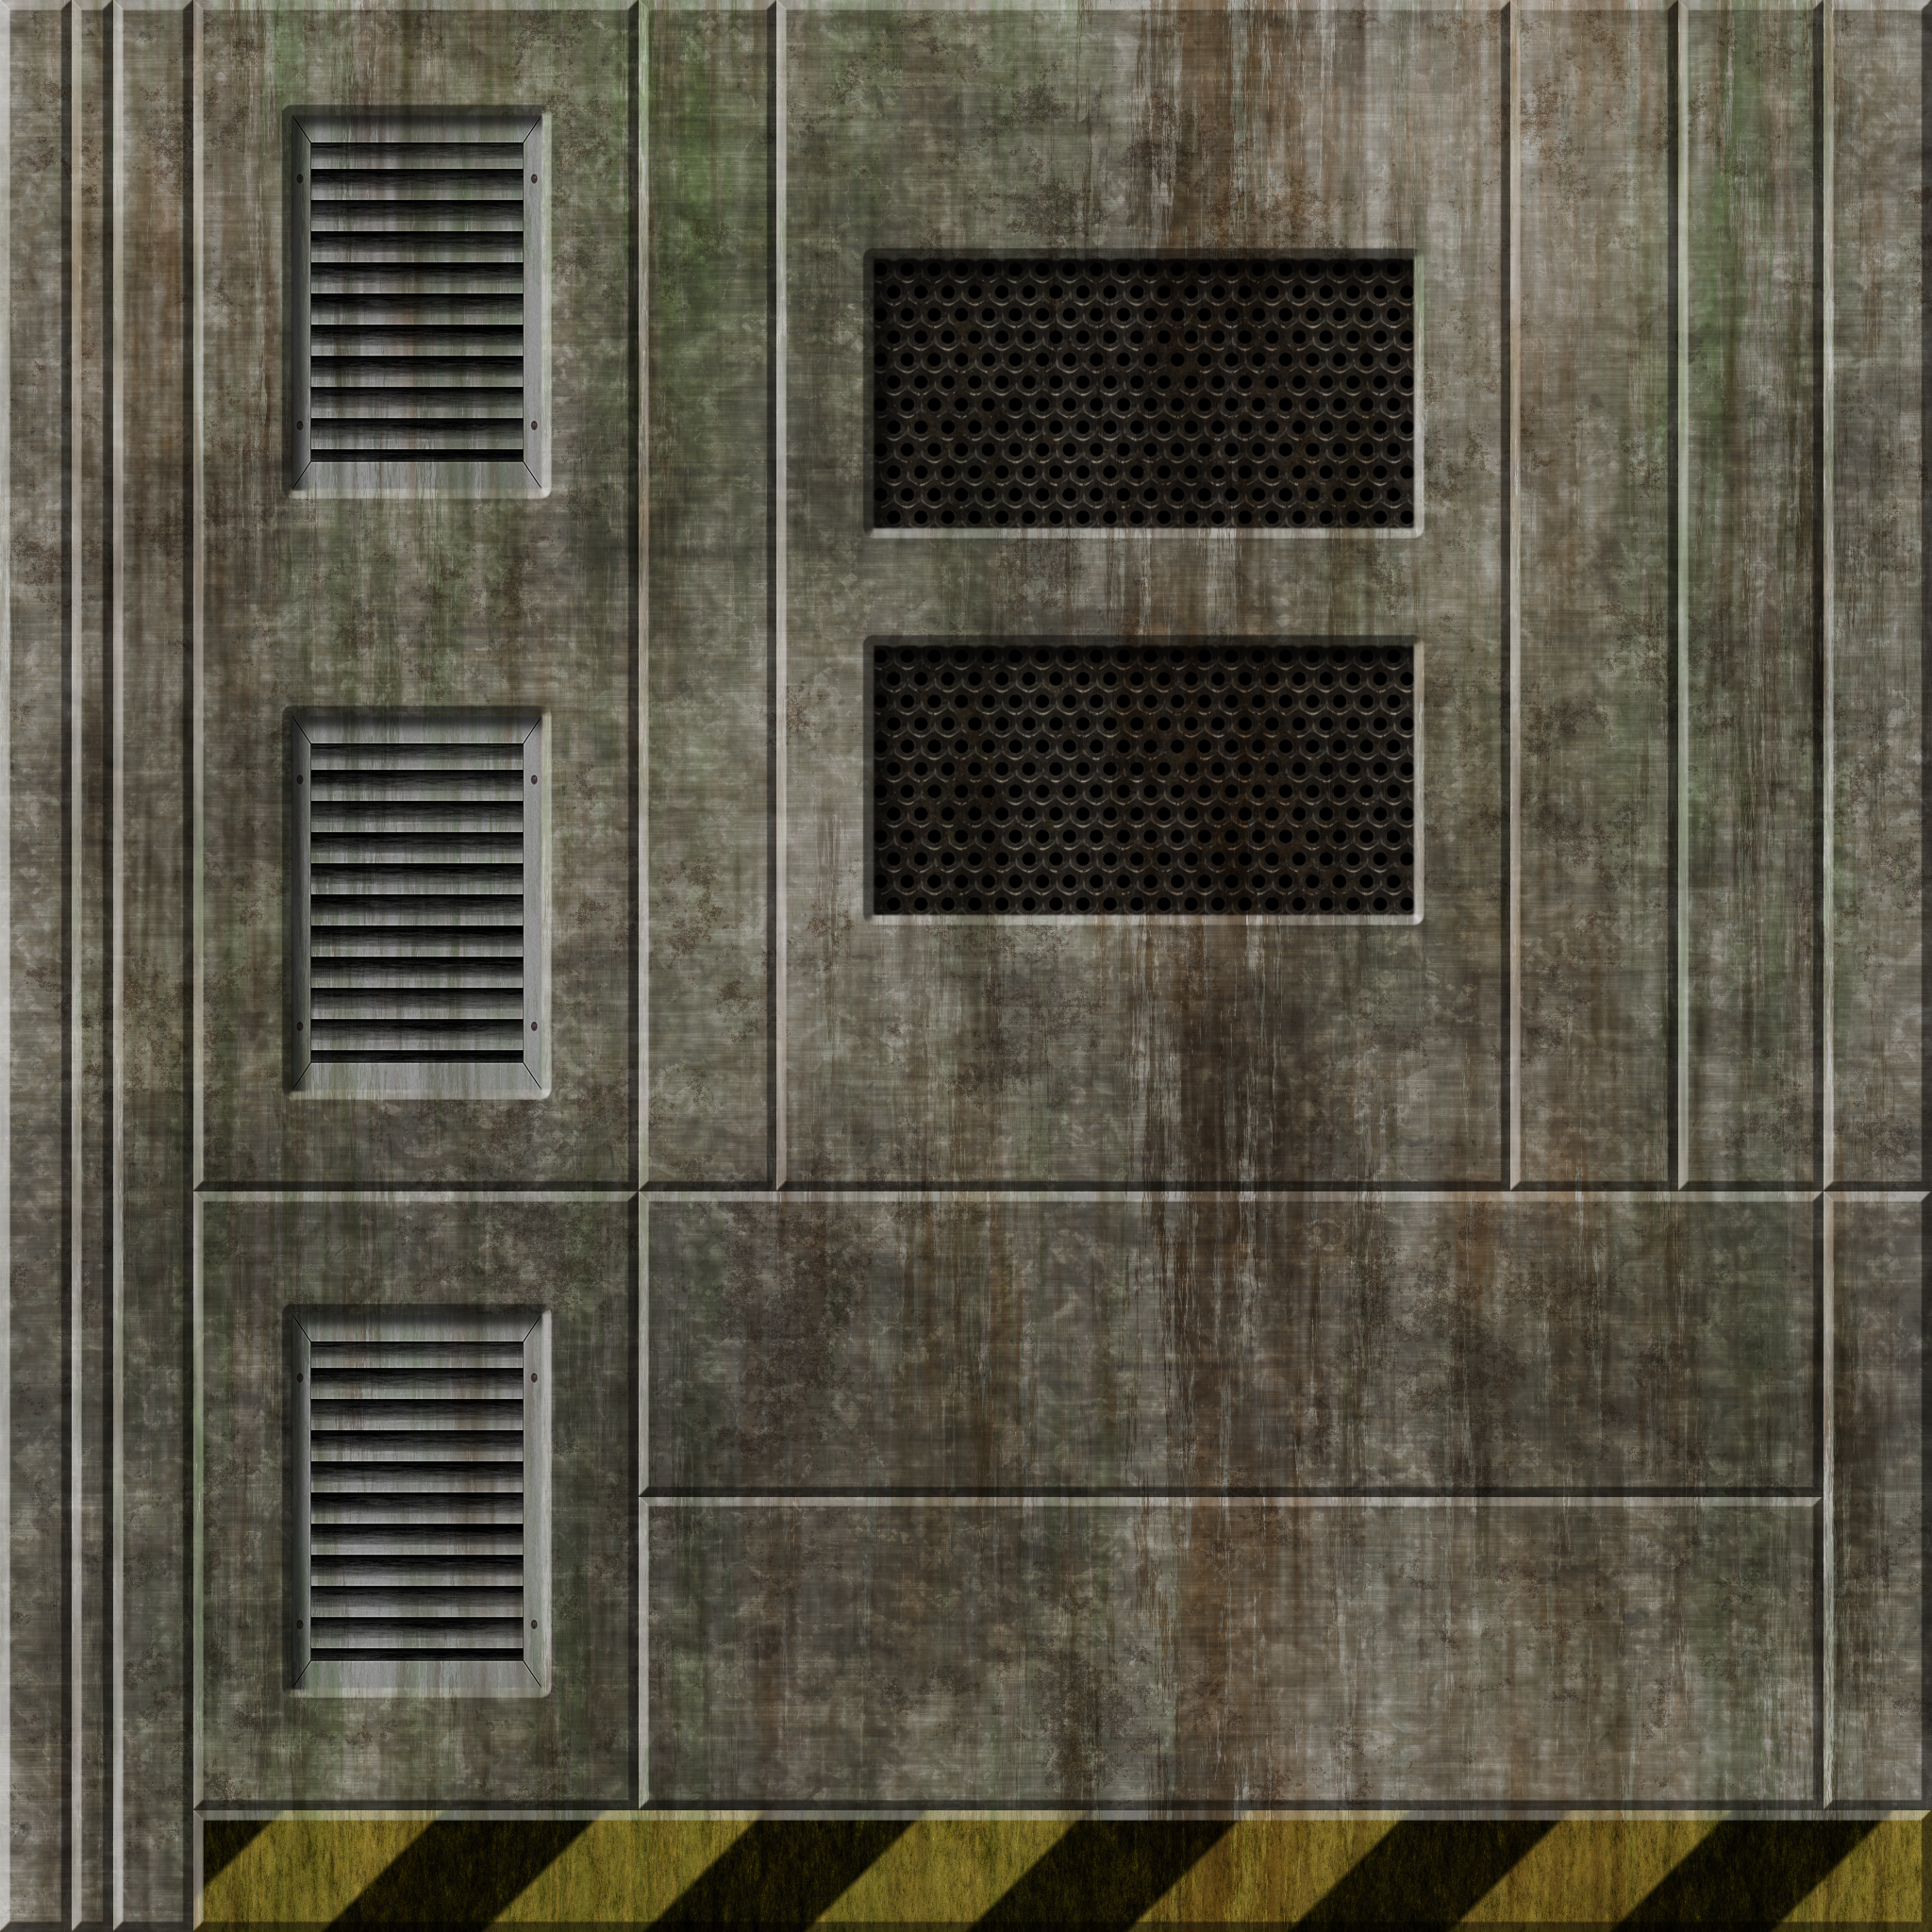 cement_wall_1_remake_by_hoover1979-dar1hid.png